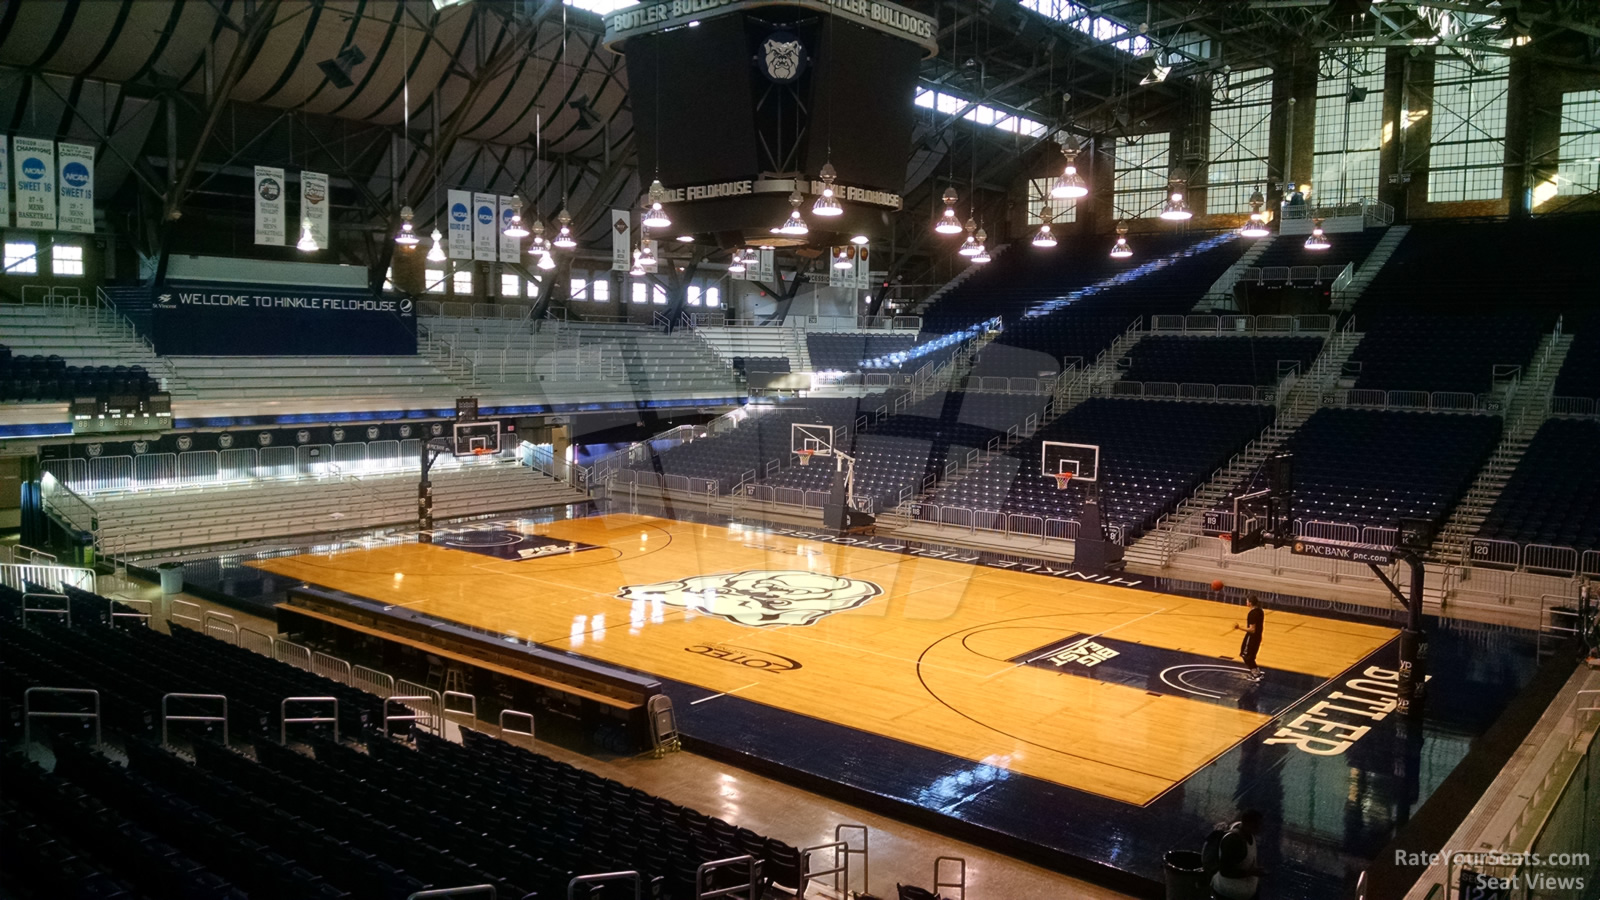 section 203, row 3 seat view  - hinkle fieldhouse